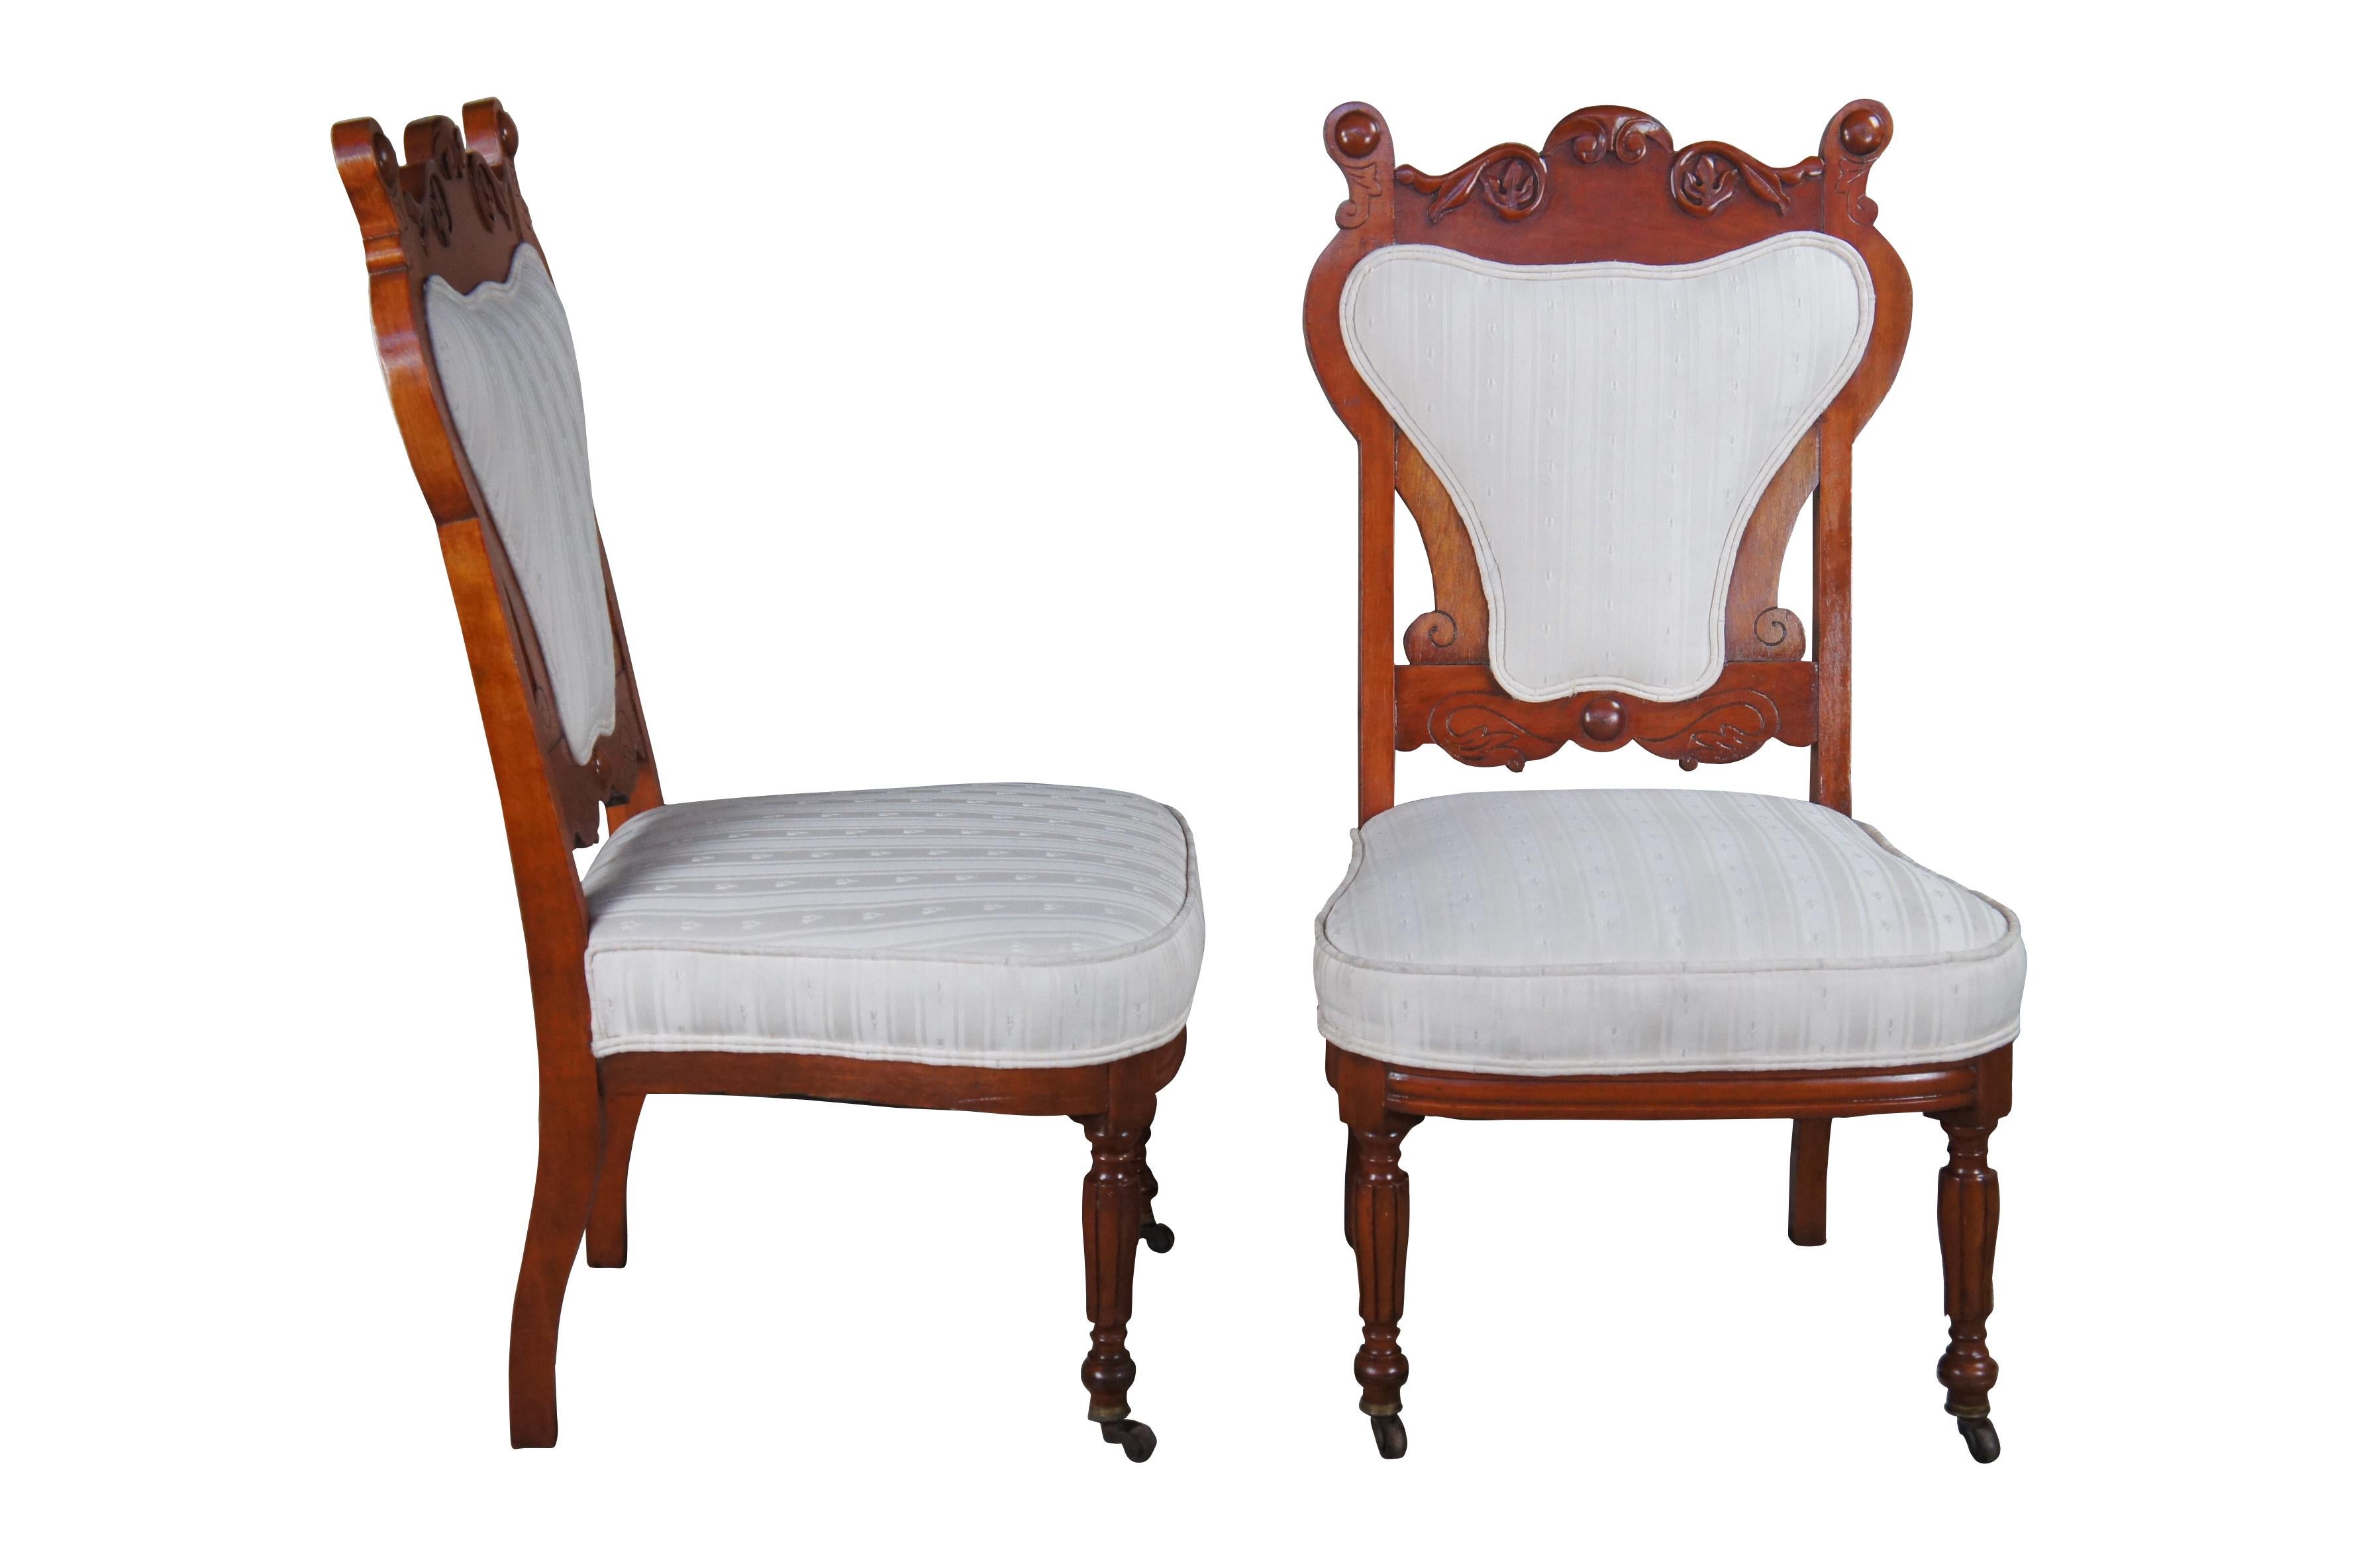 Two antique Edwardian / Victorian parlor dining chairs.  Made of mahogany featuring Art Nouveau styling with a very unique heart shaped back with carved foliate design at the crest, flanked by half ball finials over pierced center, supported by